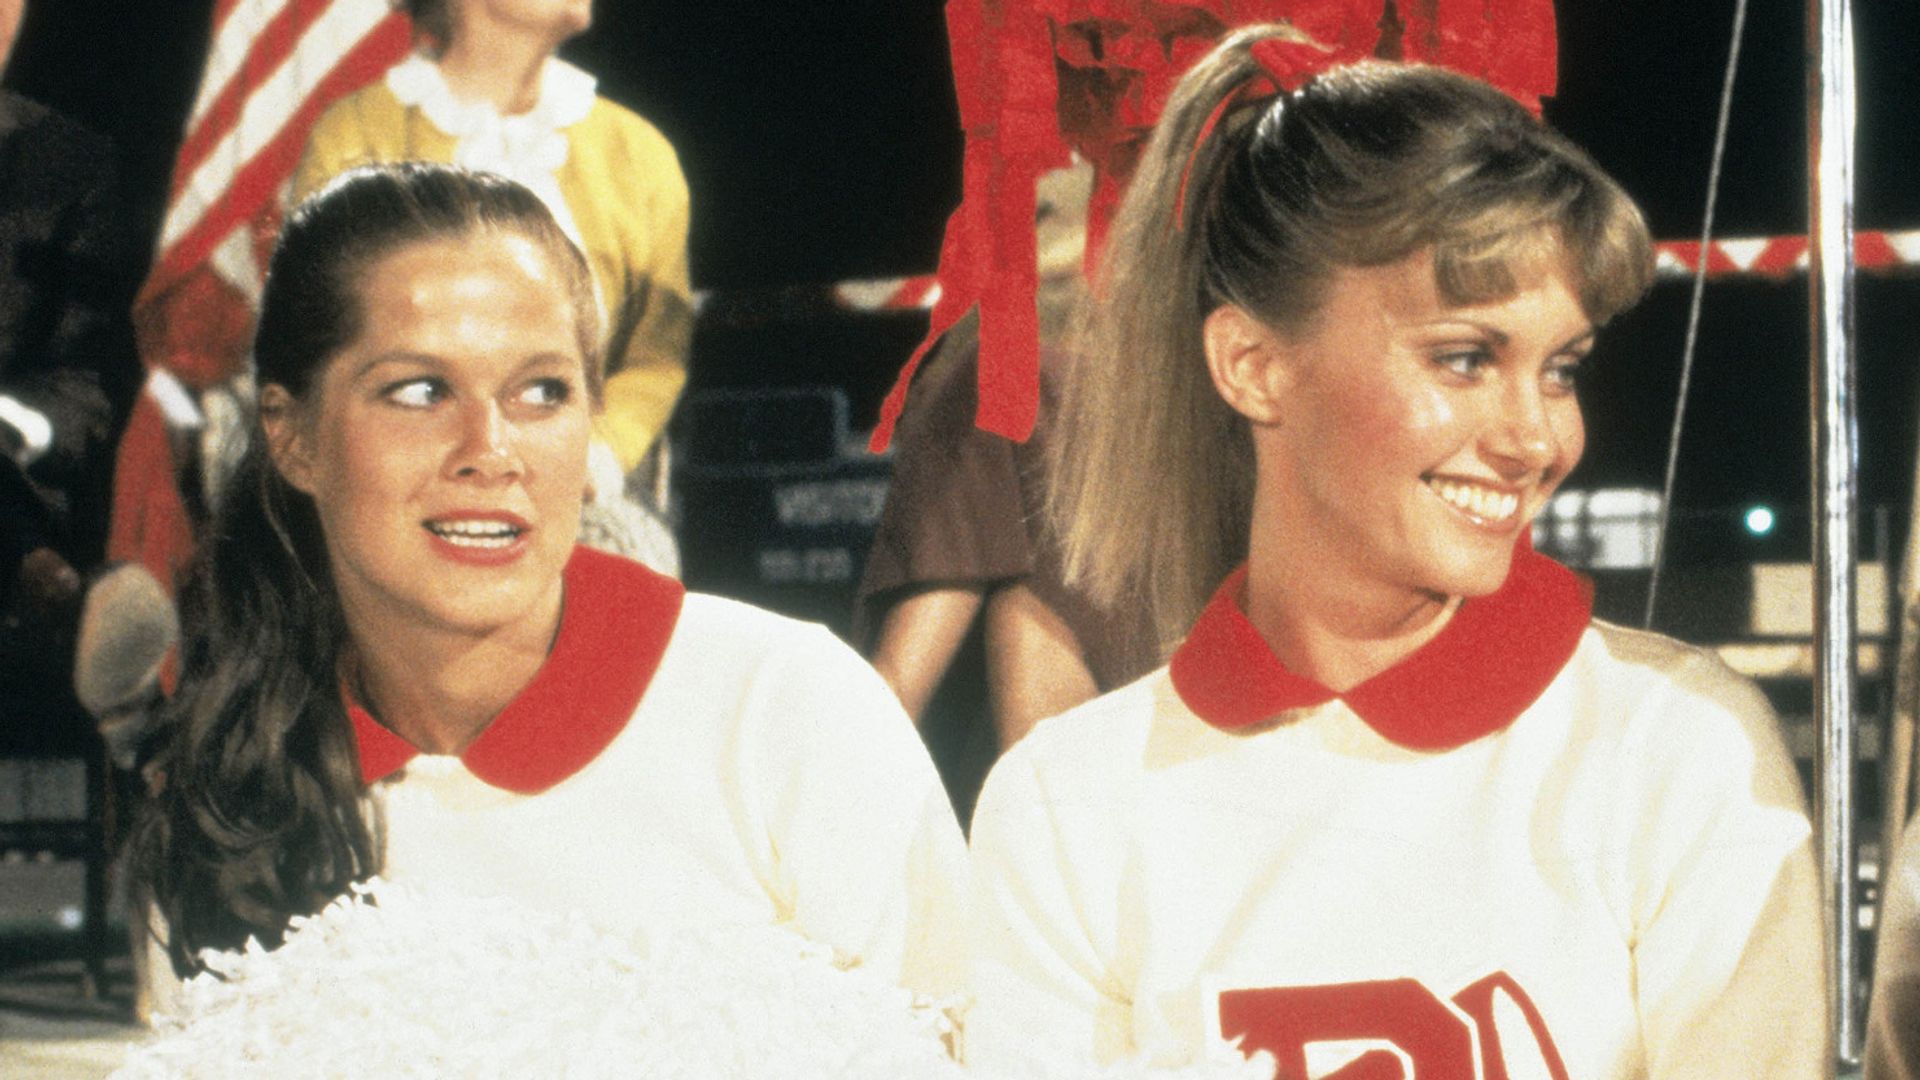 Grease star who played Patty Simcox dies ...